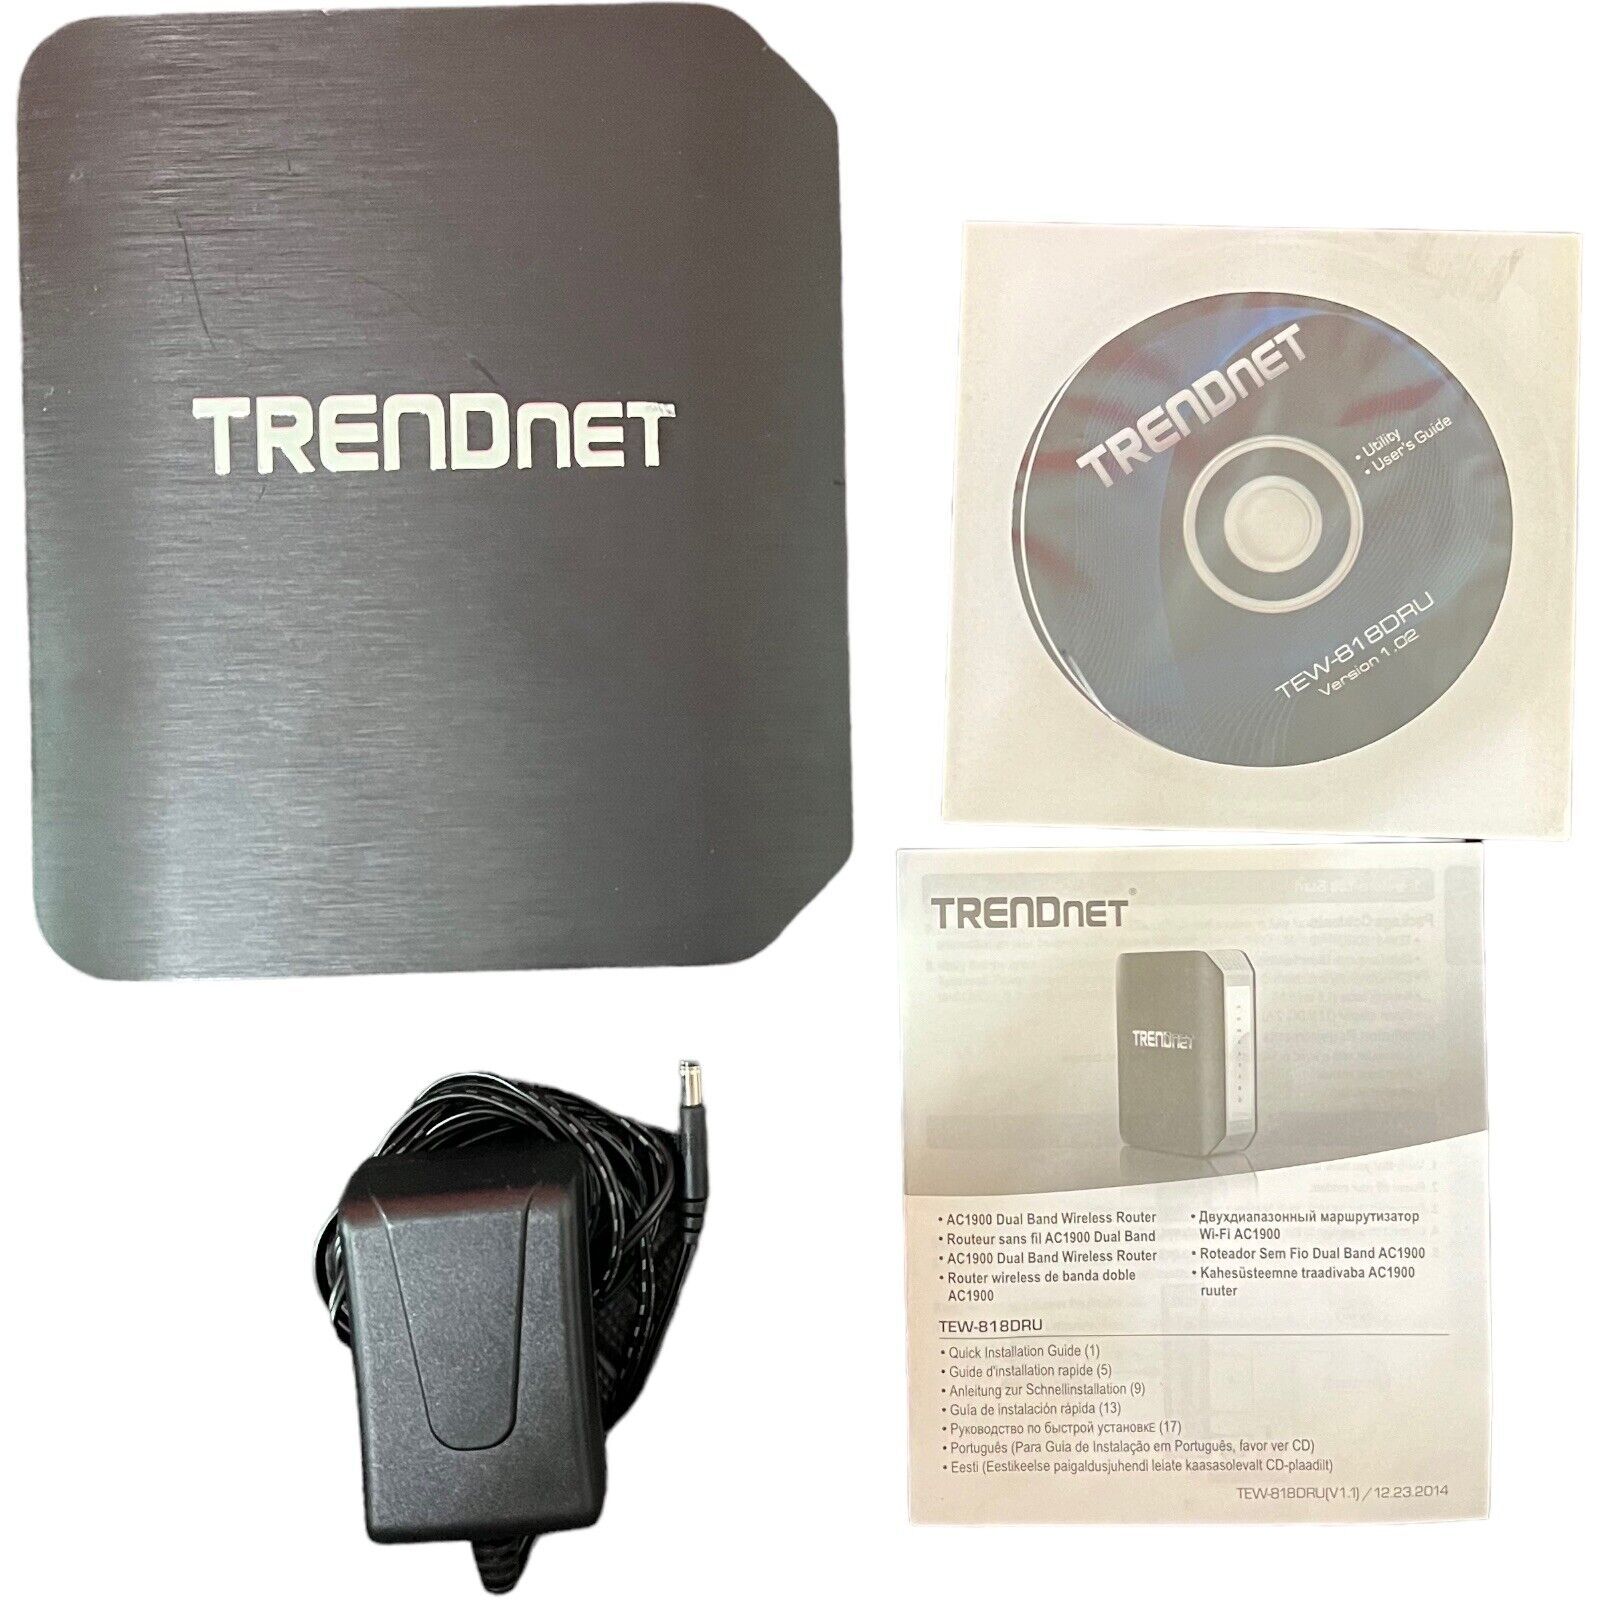 Trendnet AC1900 Dual Band Wireless Router (TEW-818DRU)